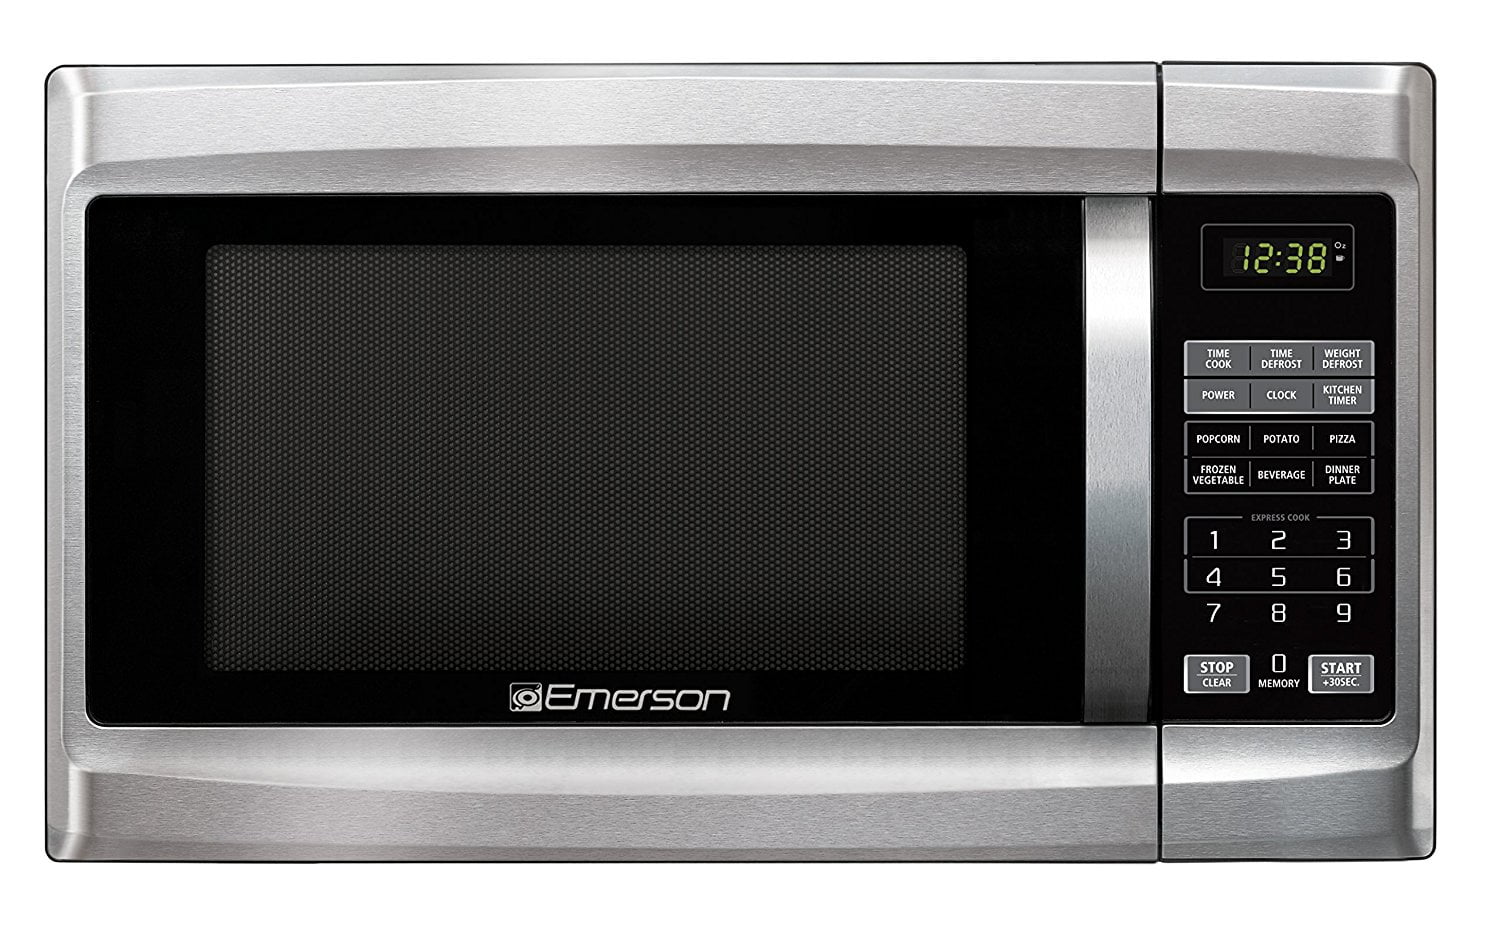 Emerson MW1338SB 1.3 Cu. Ft. 1000 Watt, Touch Control Microwave Oven